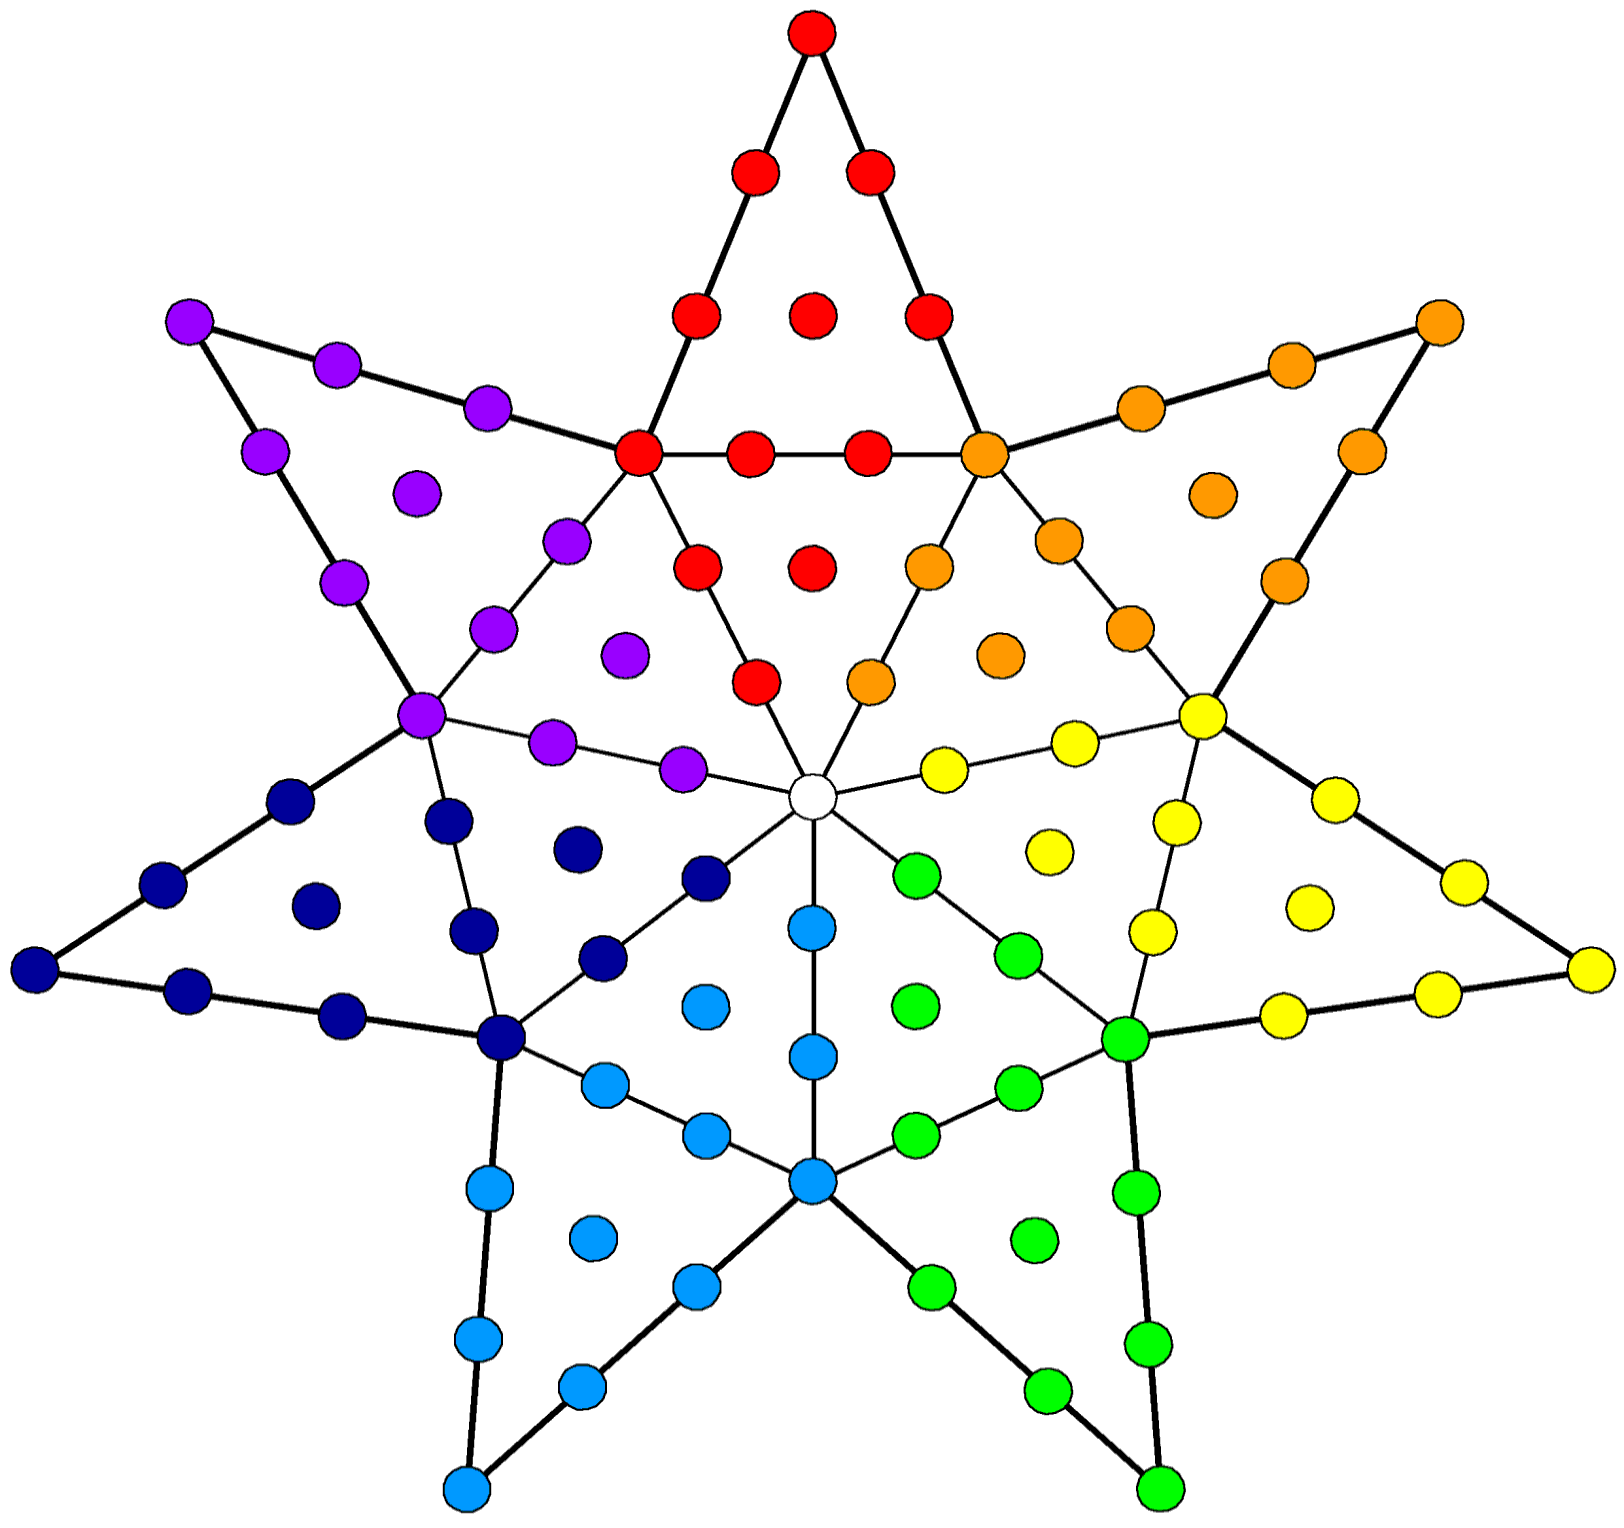 84 yods surround centre of 7-pointed star